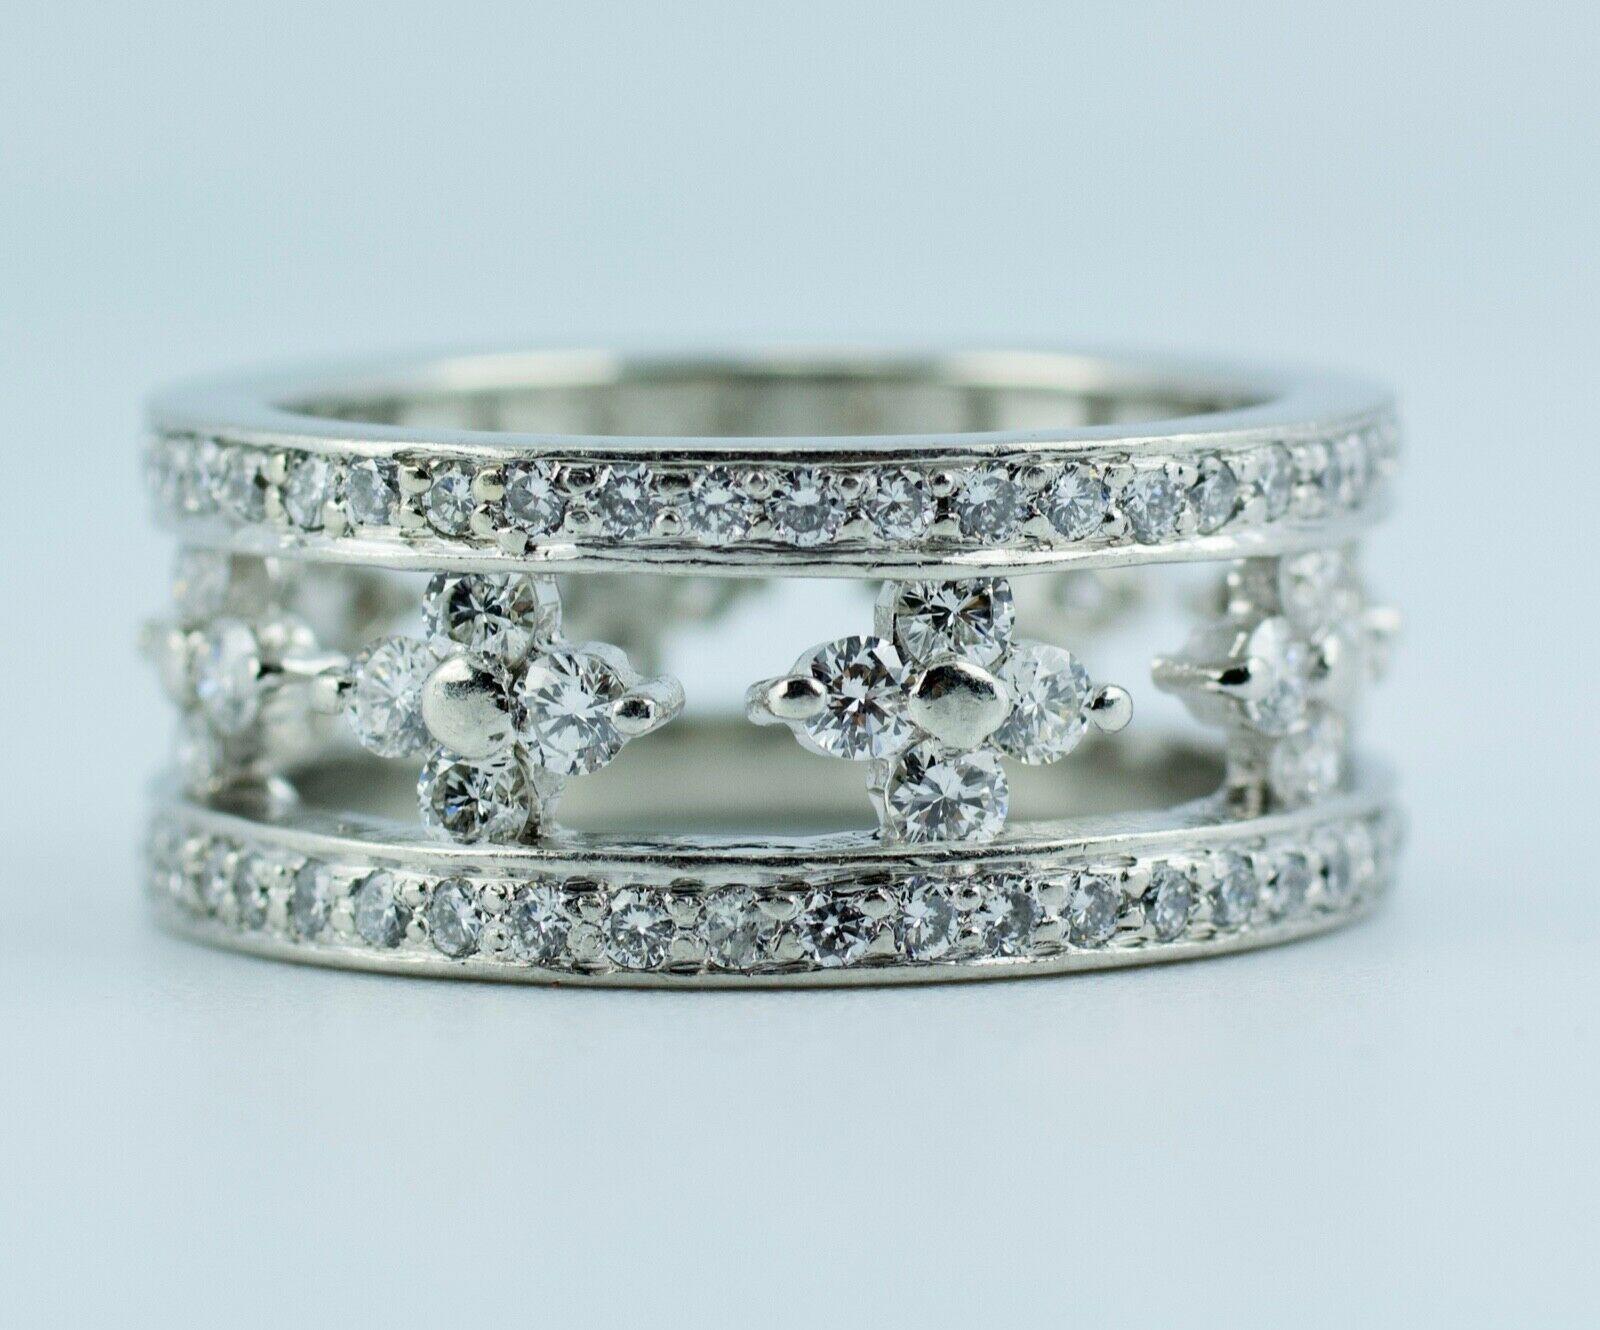 KWIAT Platinum White Round Diamond  Eternity Band
Ring Size 6.25
10.2 Grams
Round White Brilliant Cut Diamonds 1.79 Carats Total Weight
Color: G-H 
Clarity:VS2-Si1
This is a beautiful diamond band that shows off these white round diamonds.  This is